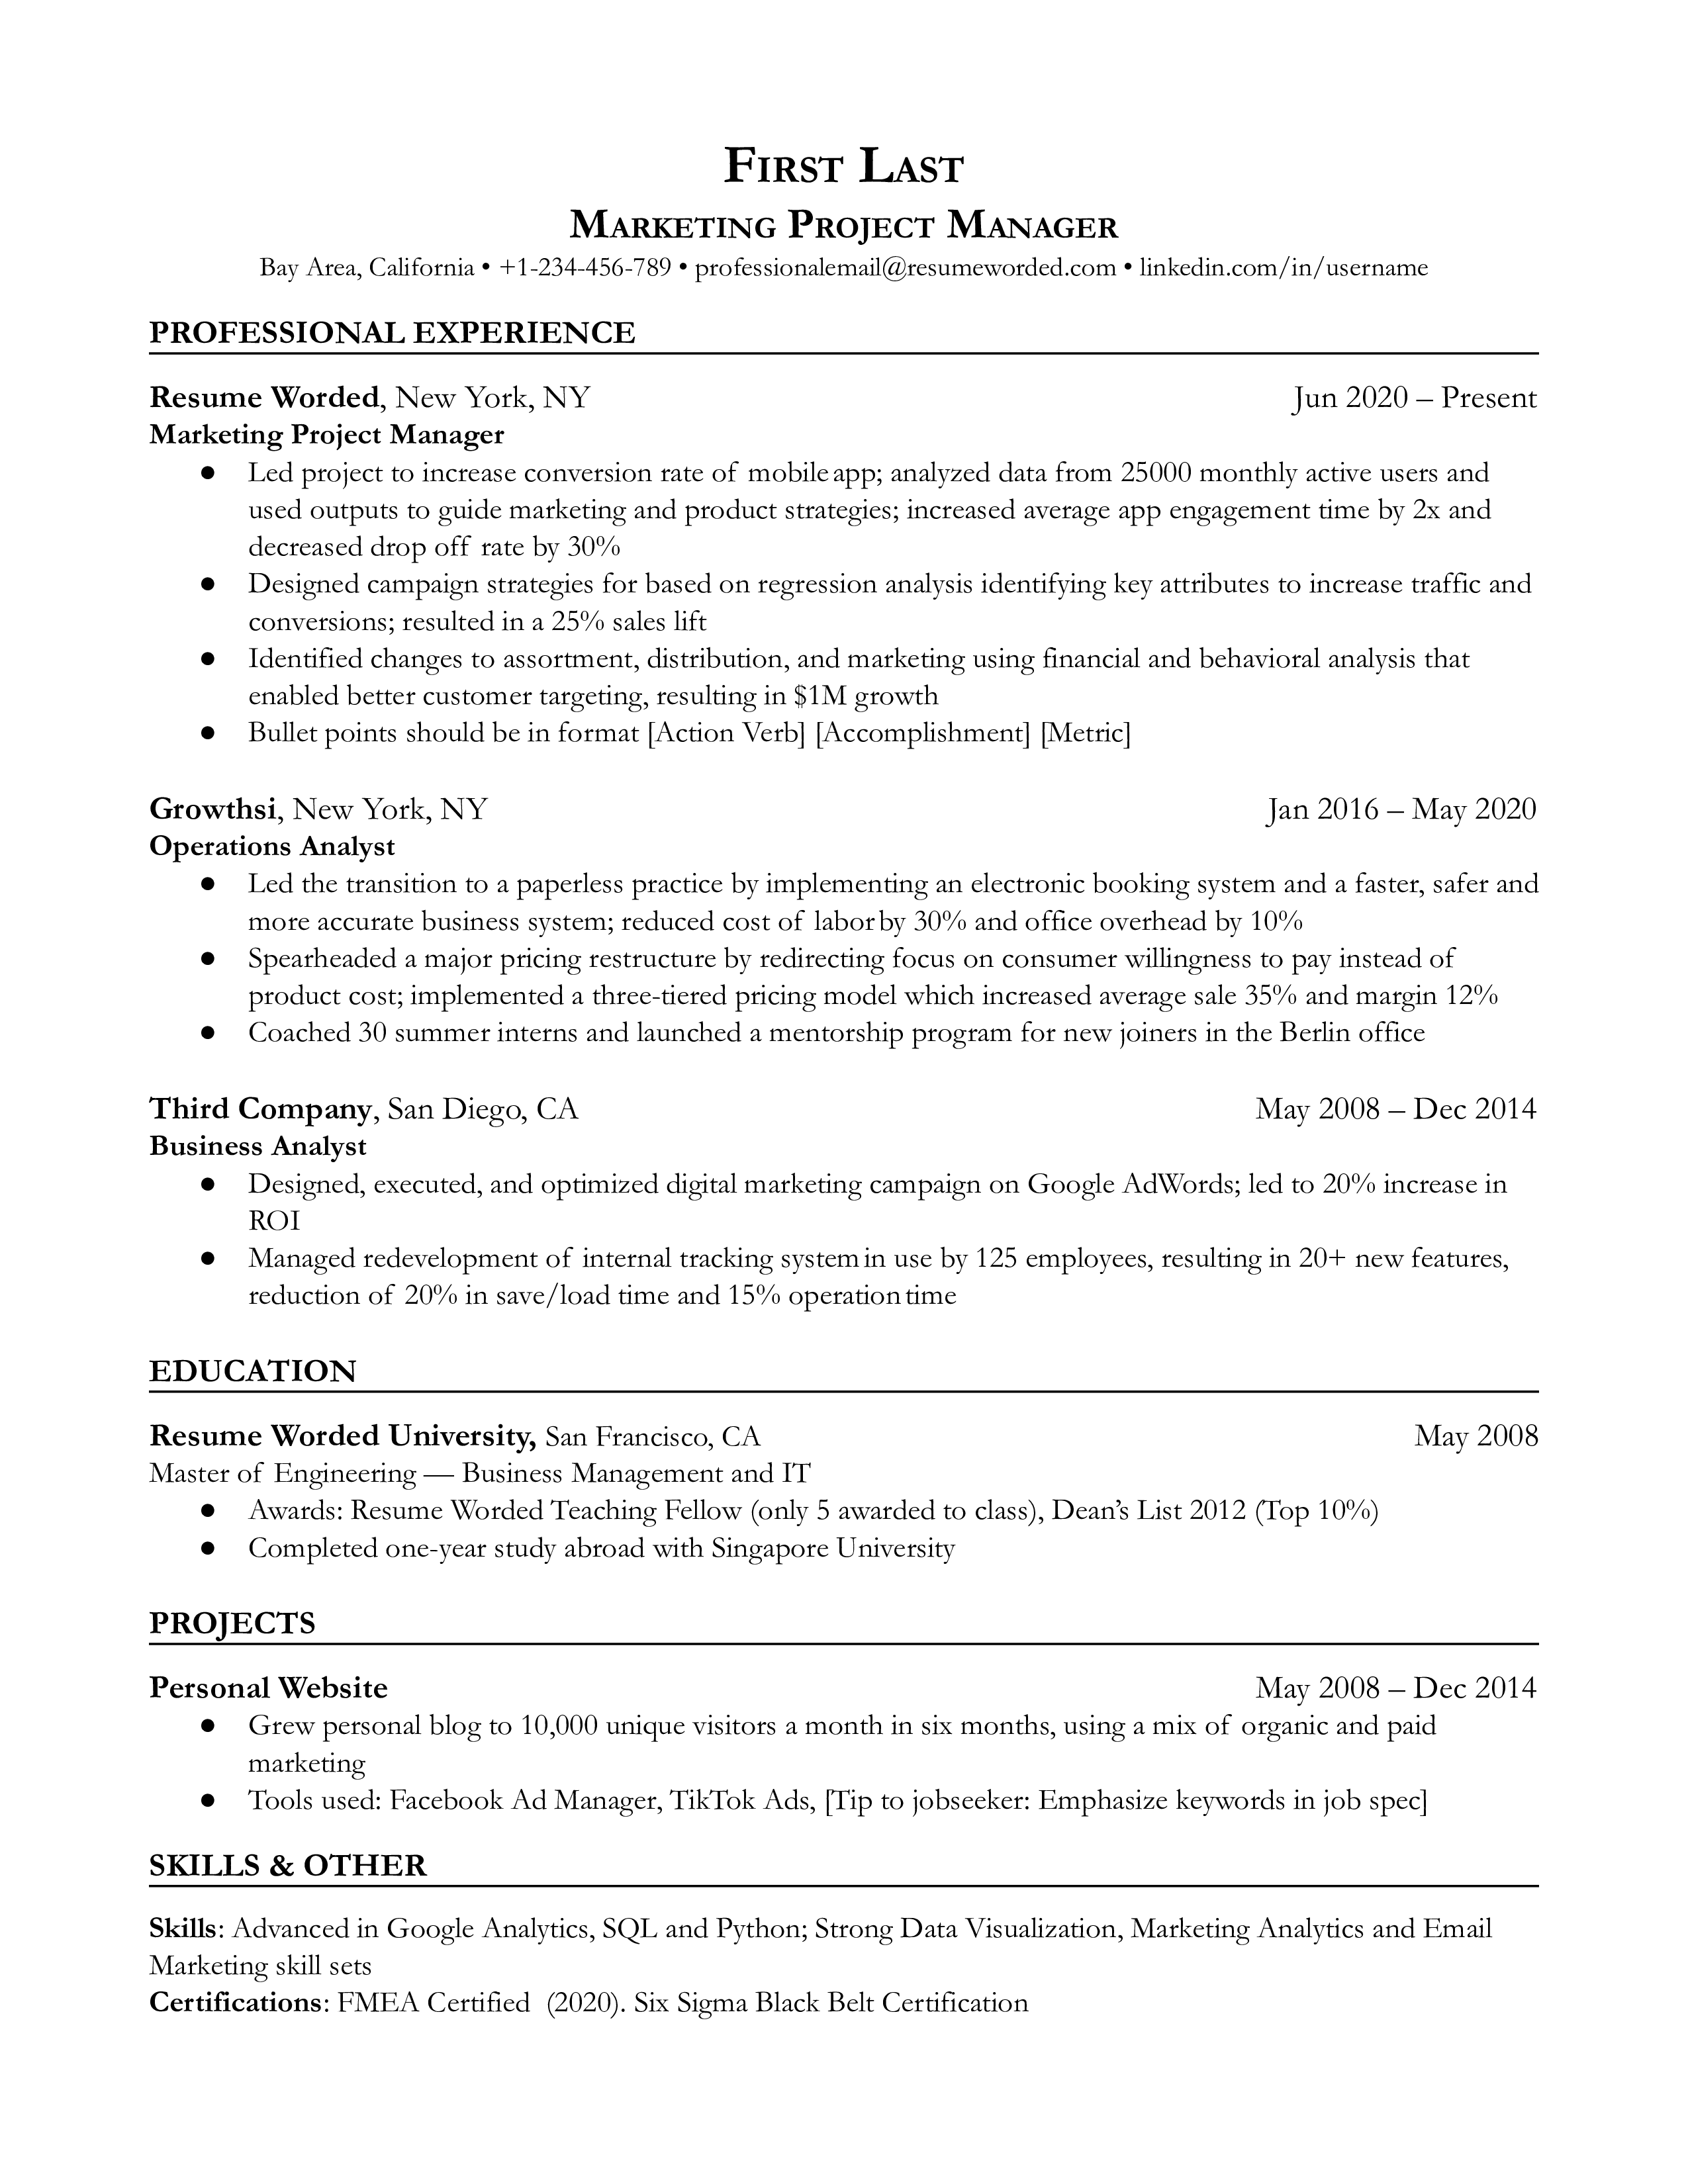 Marketing Project Manager Resume Template + Example